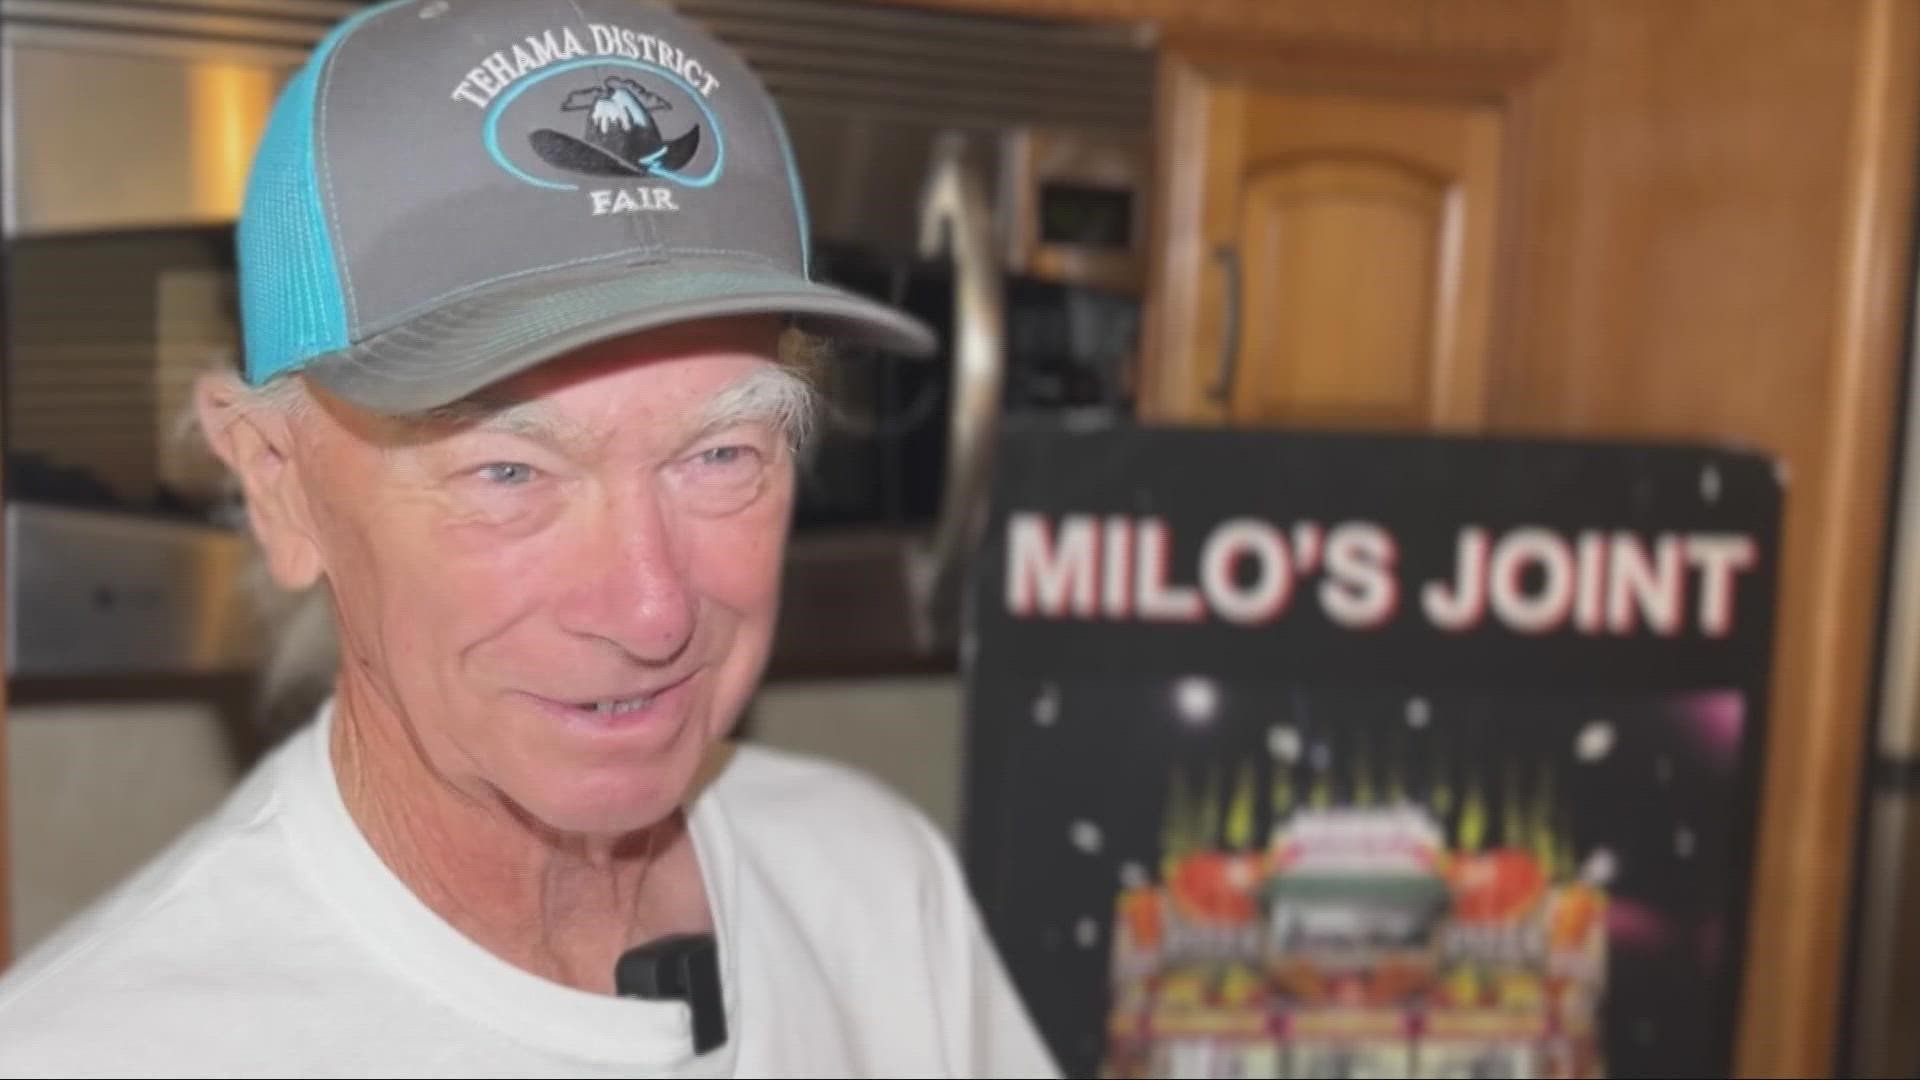 Milo Franks has been serving corn dogs at the California State Fair for more than 50 years.